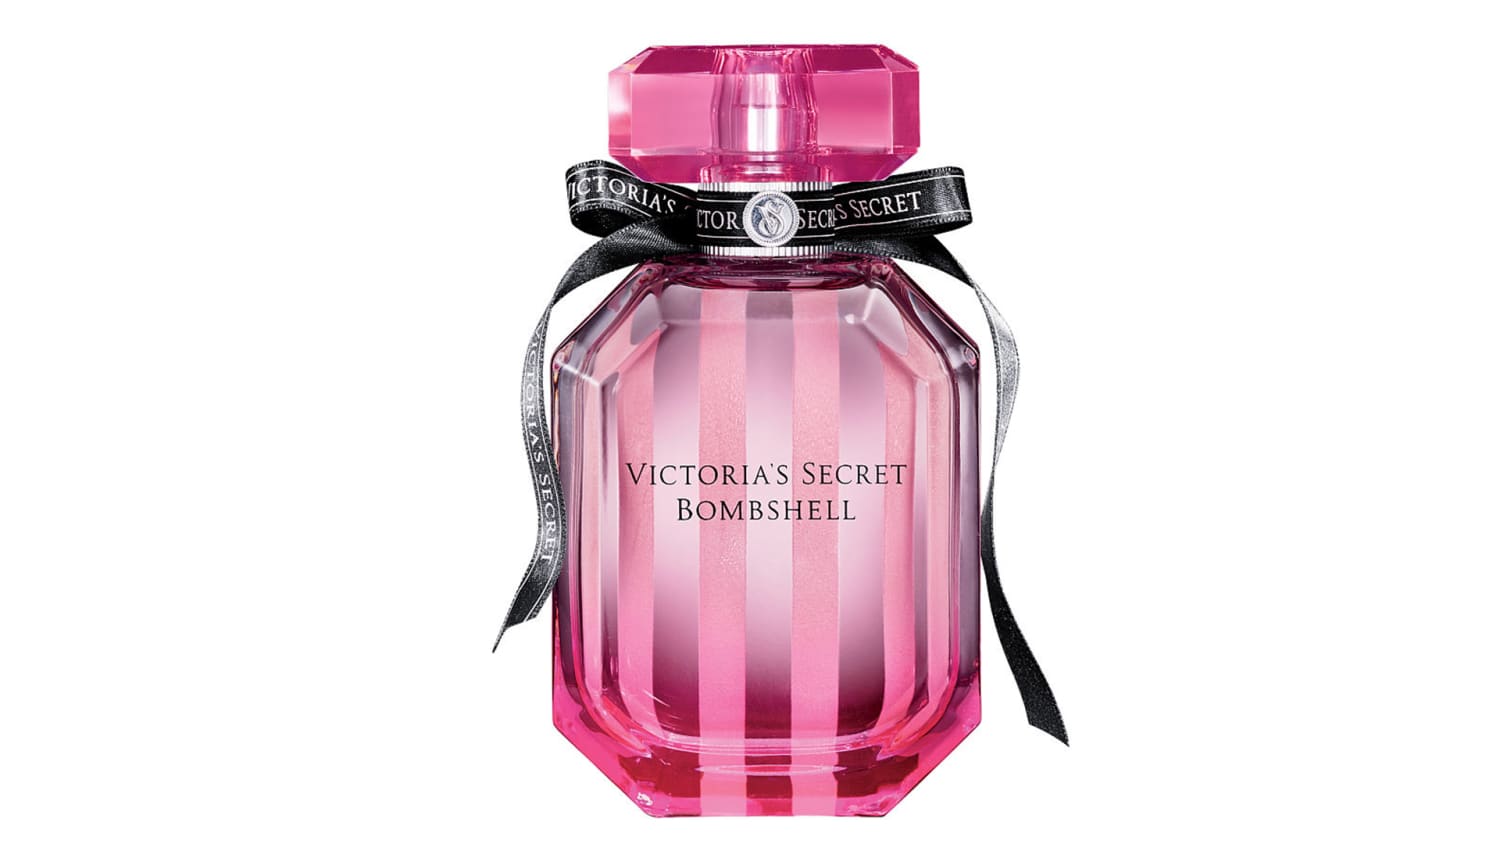 Victoria's Secret Bombshell perfume may repel mosquitoes - TODAY.com